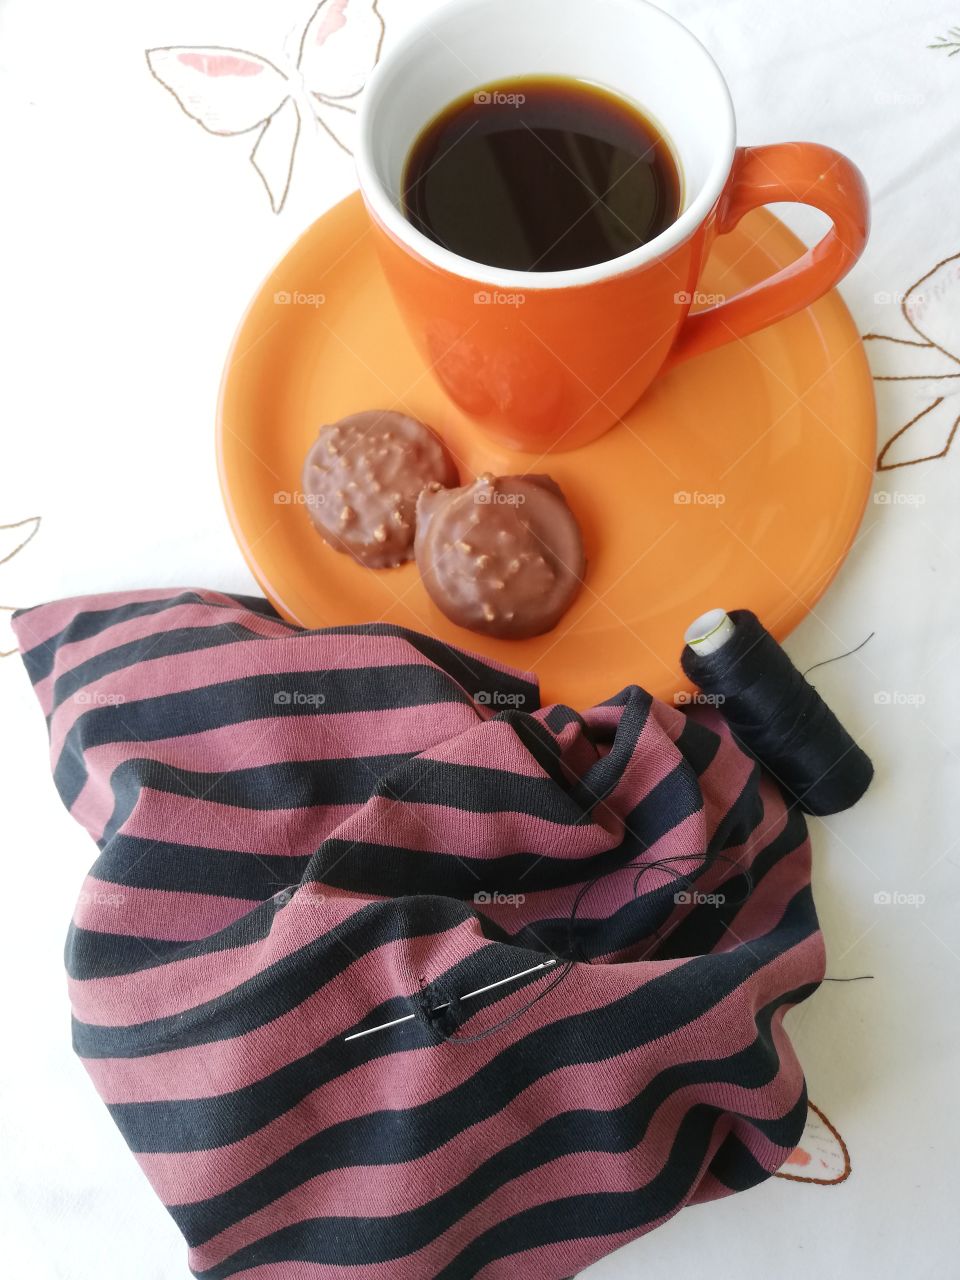 On a white patterned table cloth is an orange coffee mug on a plate with two chocolate biscuits. Next to them is a black and brown striped cloth. The hole will be sewn together with a needle and yarn.